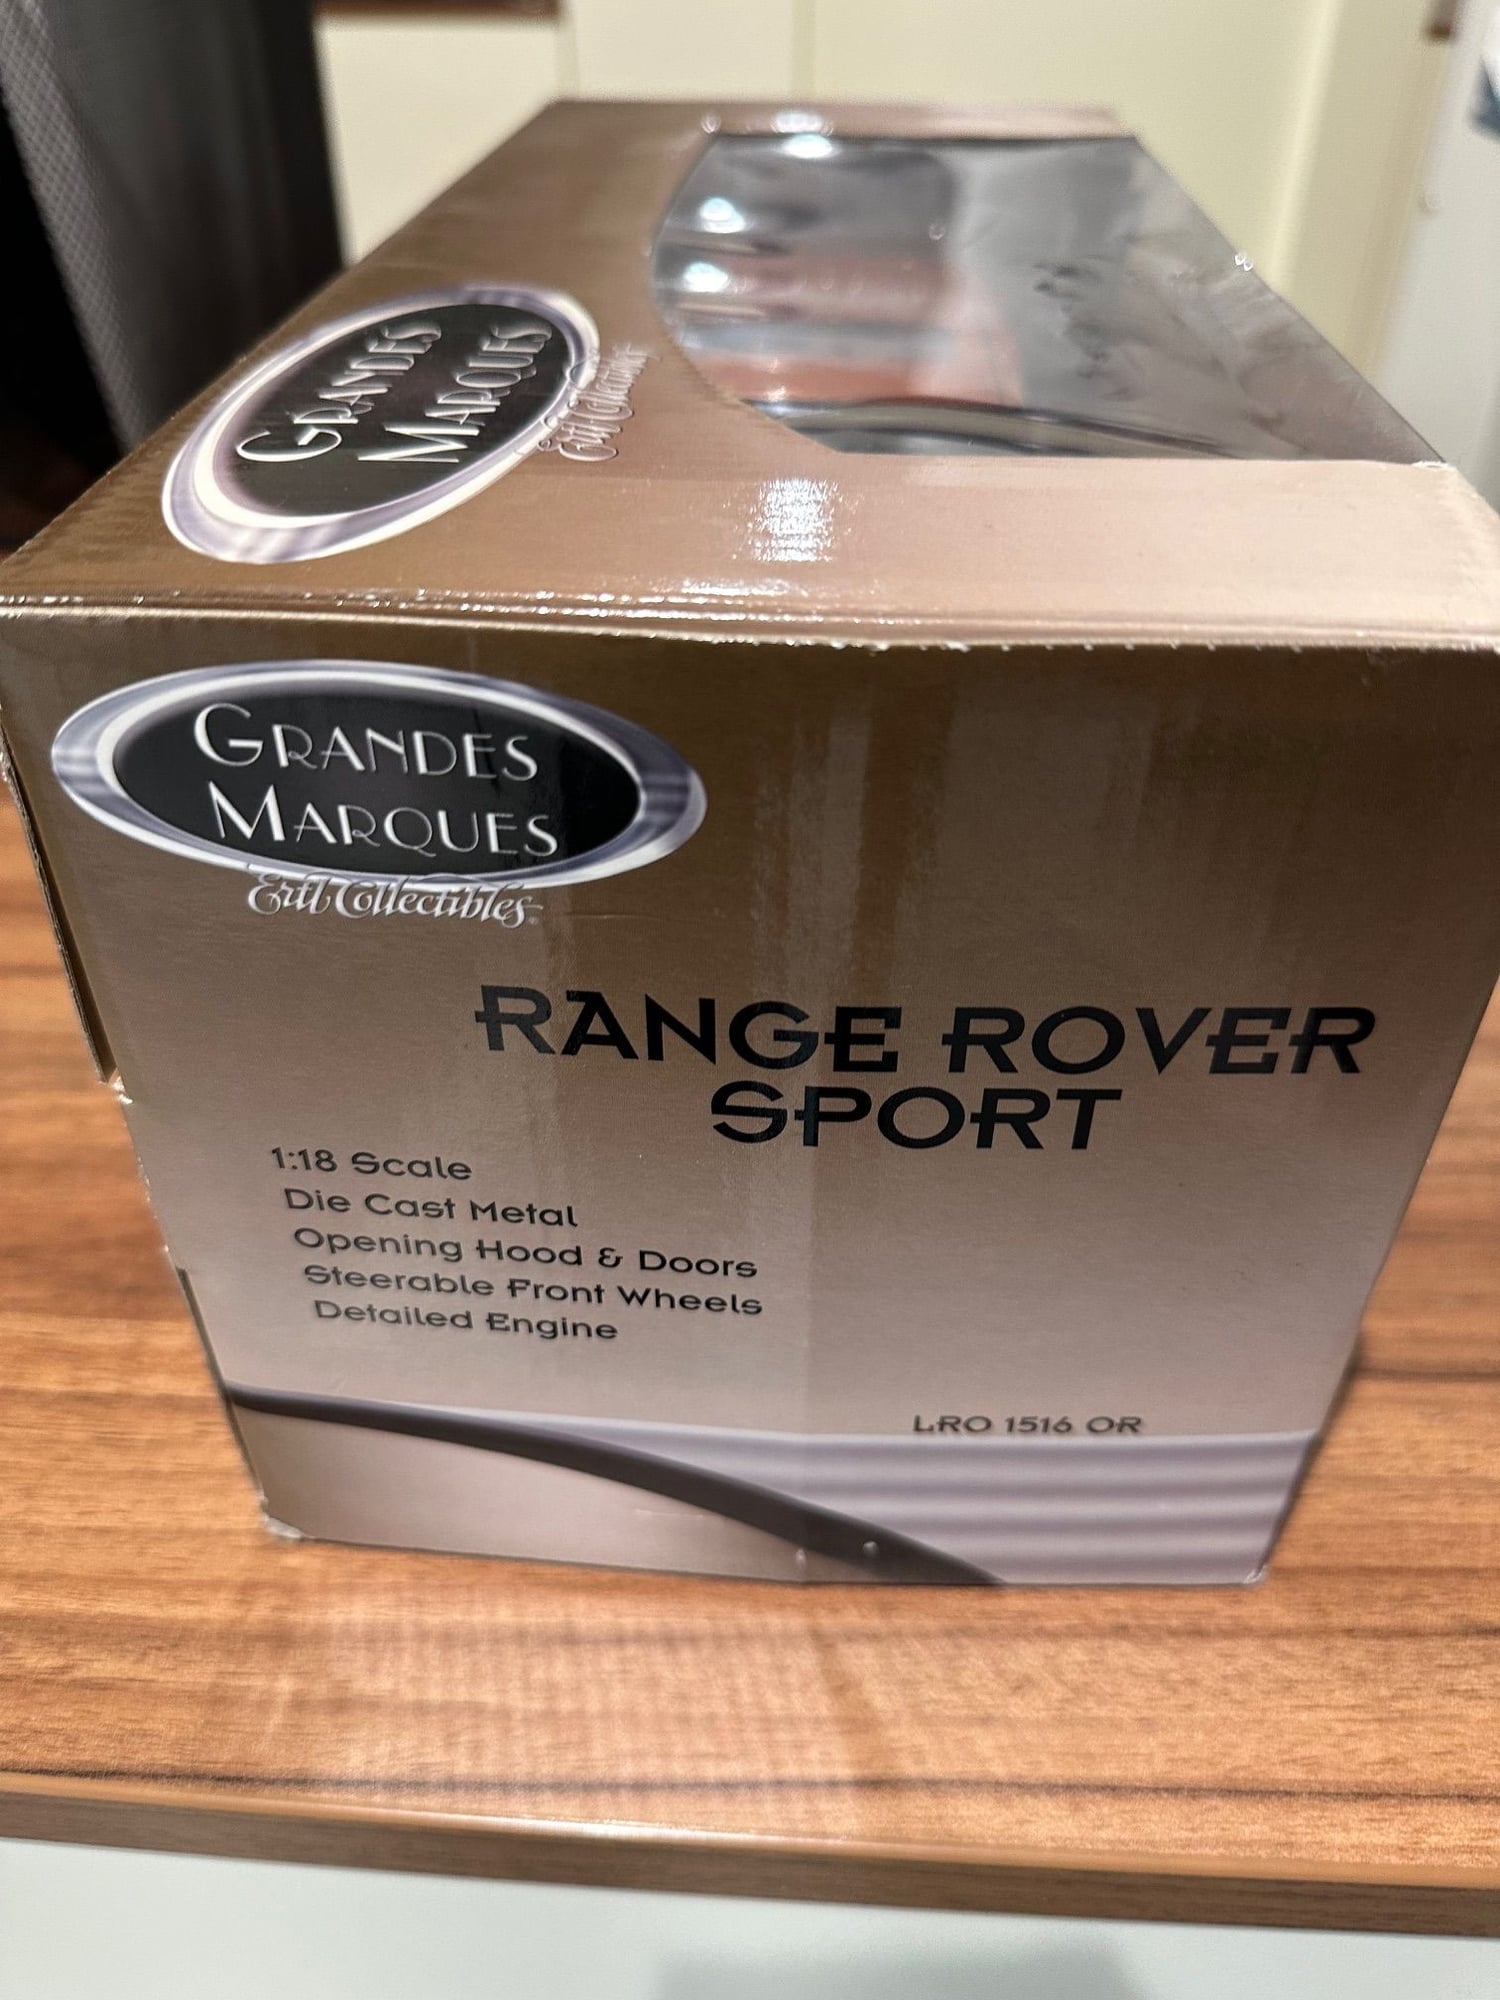 Miscellaneous - Ertl grandes marques range rover sport lr01516or brand new never opened nos 150.00 - New - All Years  All Models - Tysons Corner, VA 22182, United States